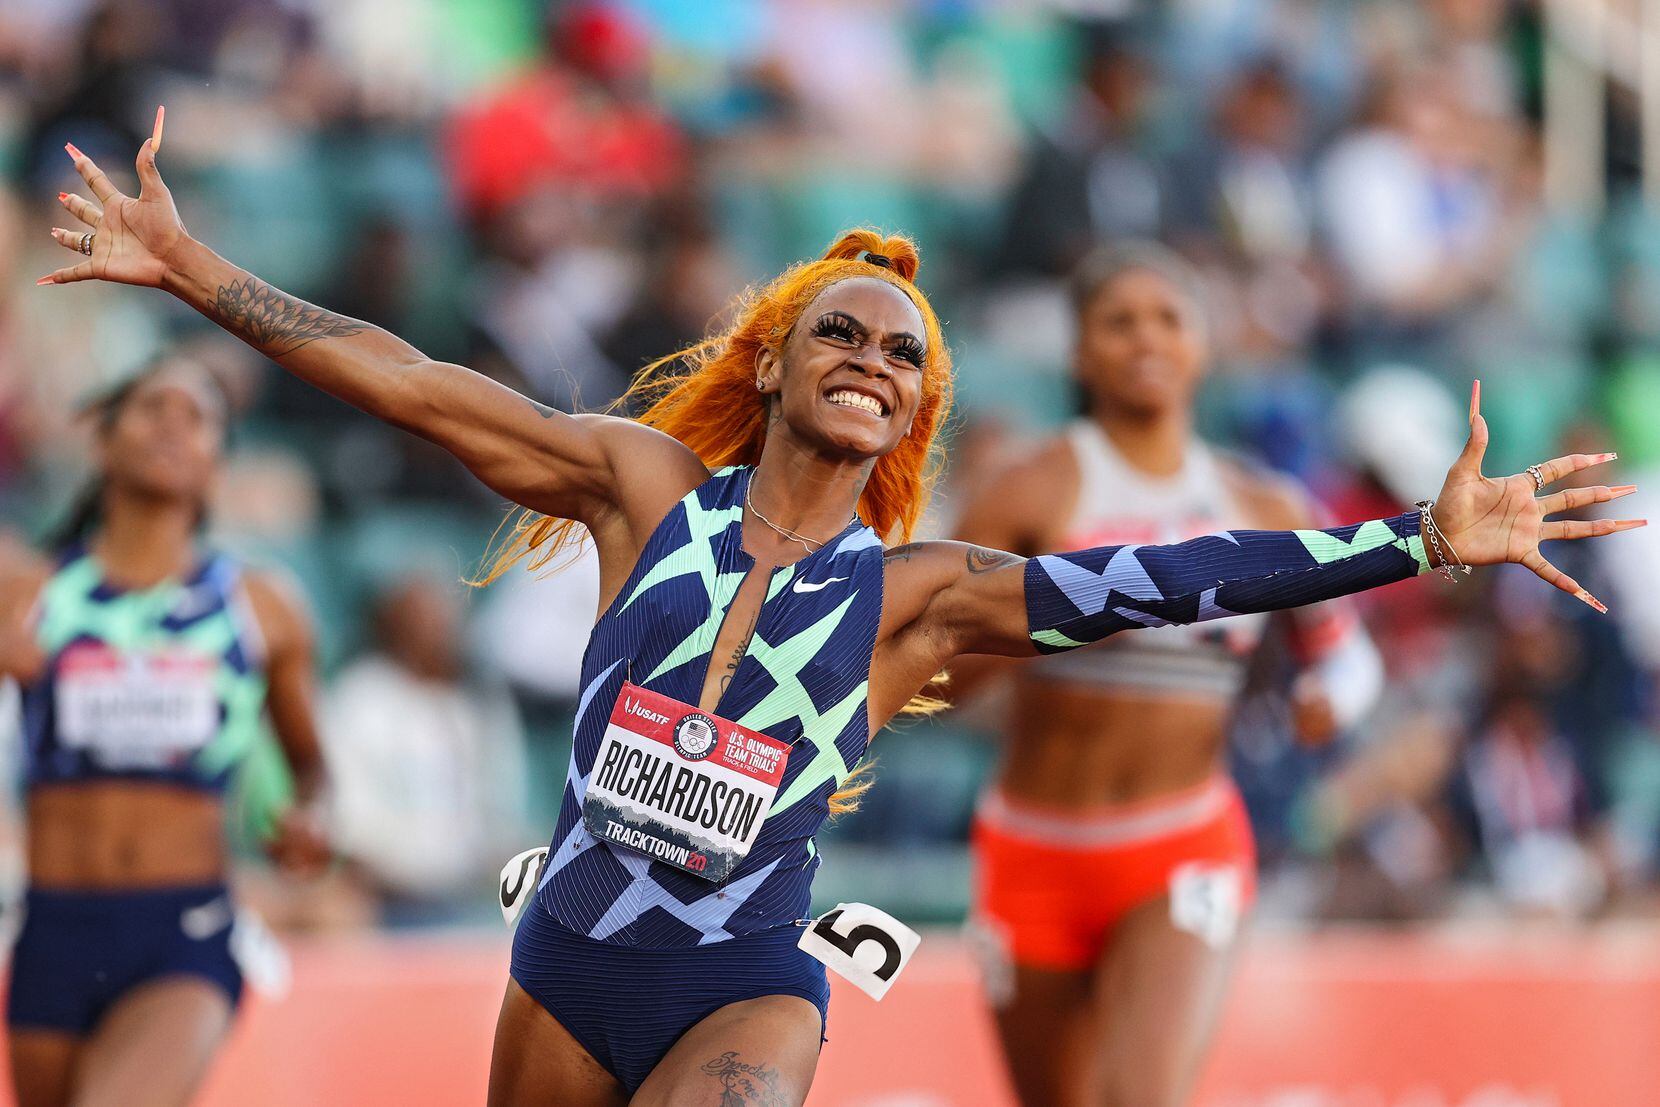 Sha'Carri Richardson celebrates winning the Women's 100 Meter final last year on day two of the 2020 U.S. Olympic Track & Field Team Trials in Eugene, Oregon.